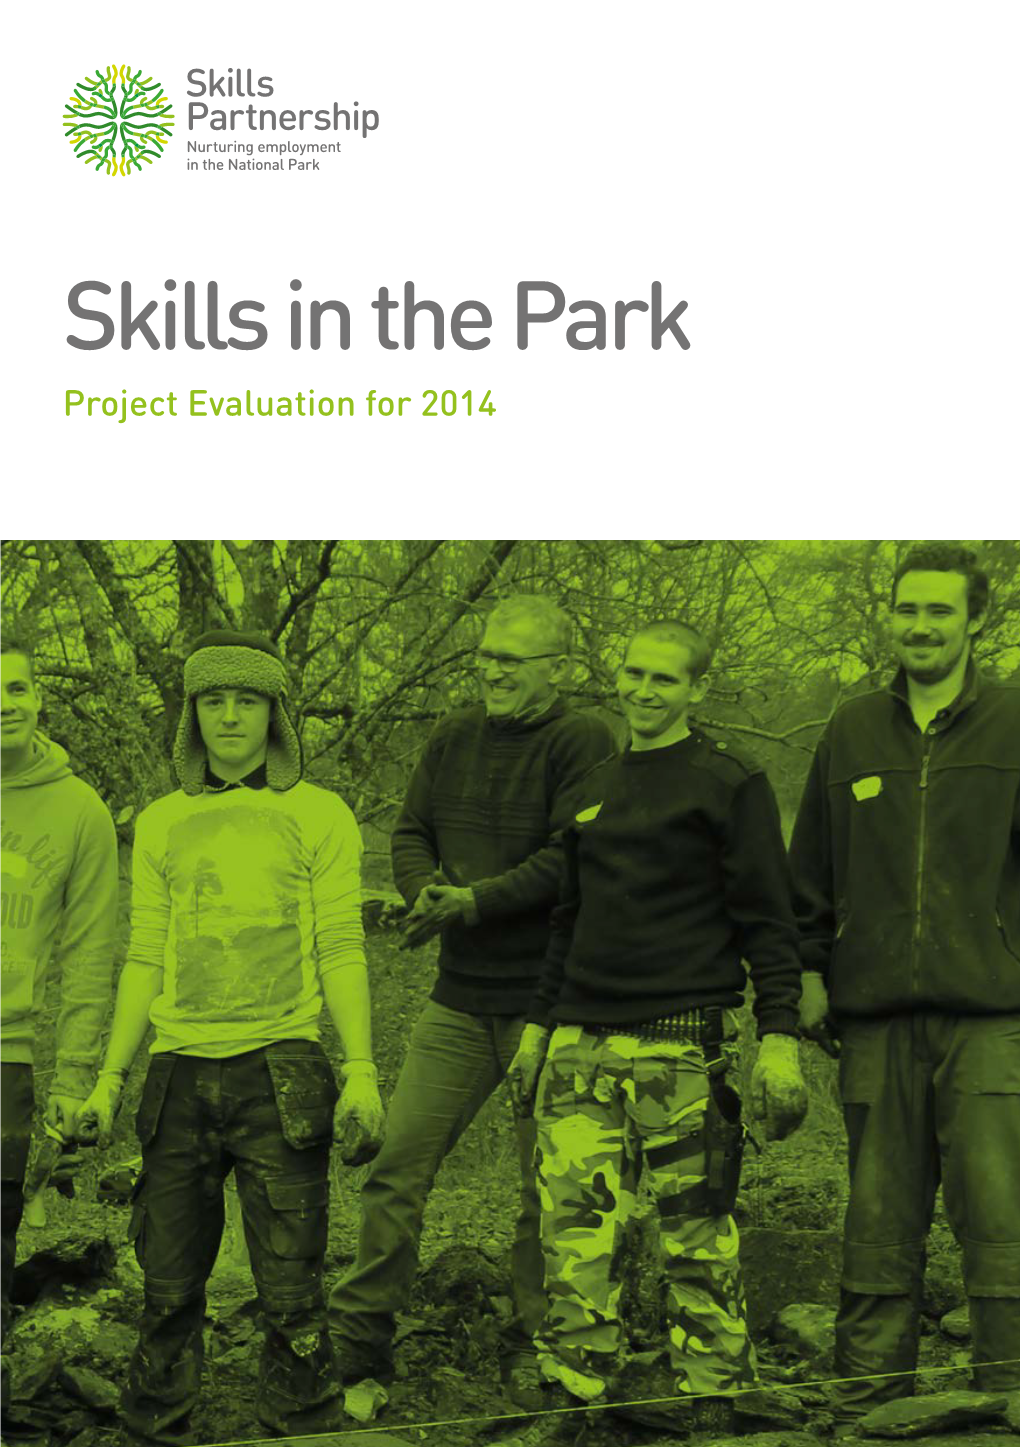 Skills in the Park Project Evaluation for 2014